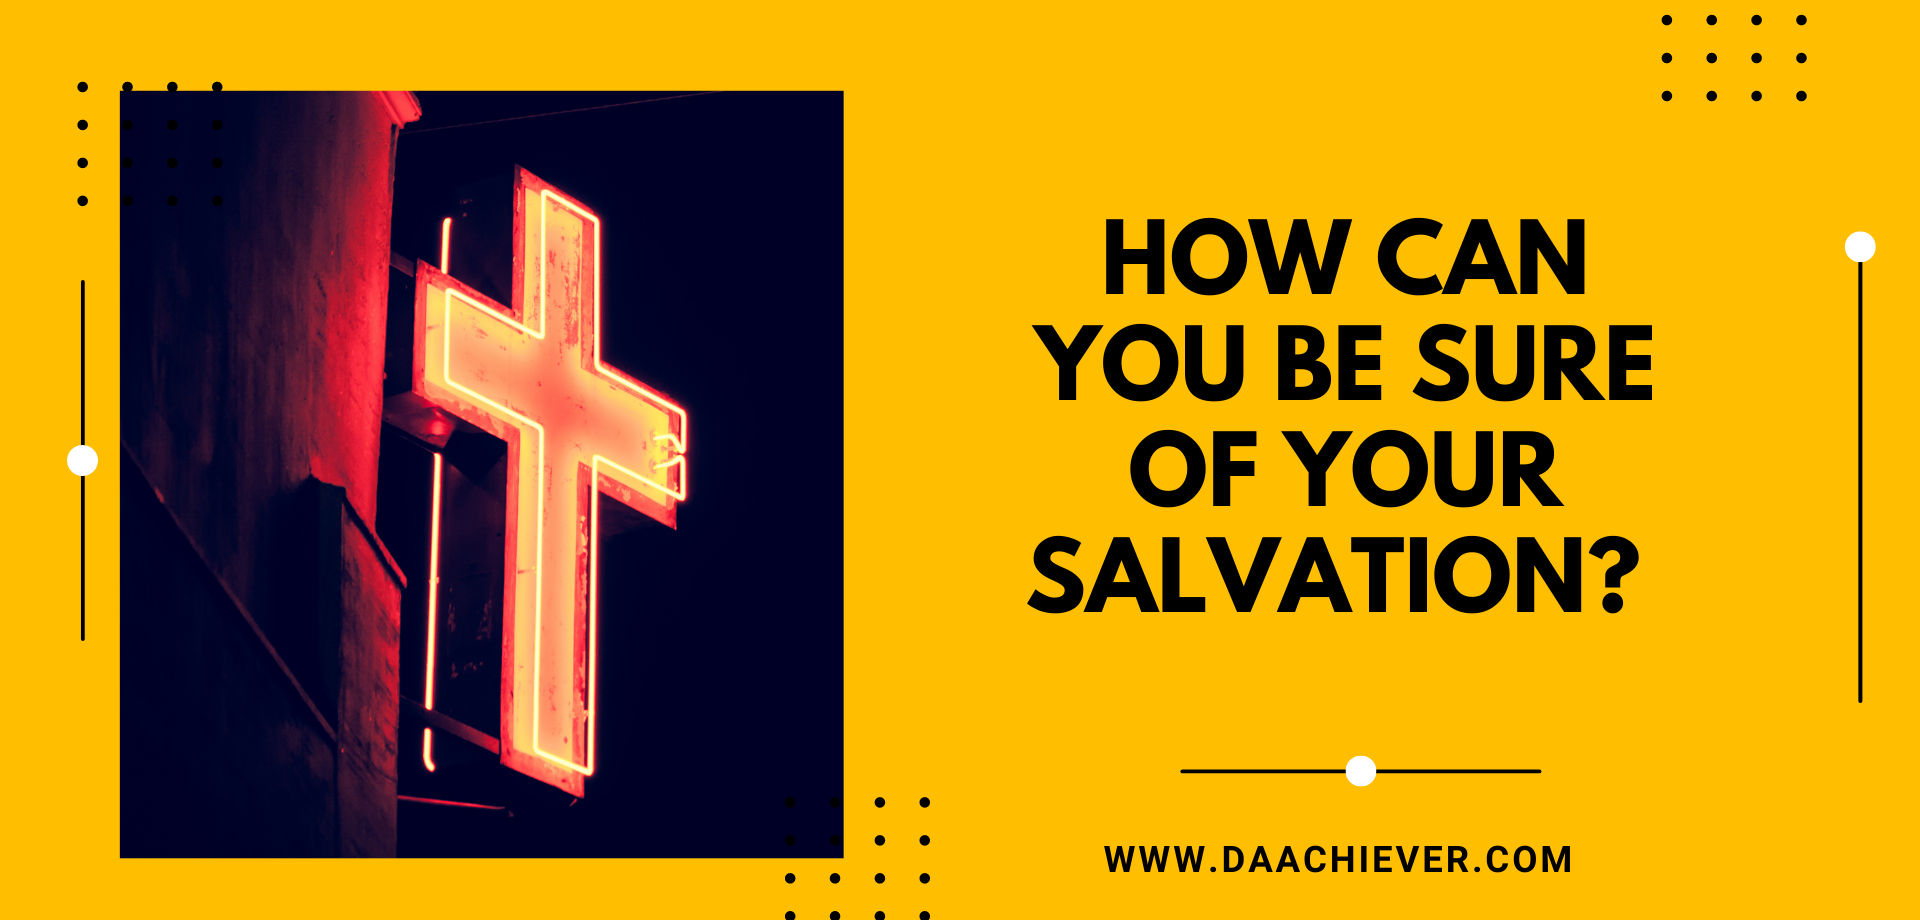 How can you be sure of your salvation?